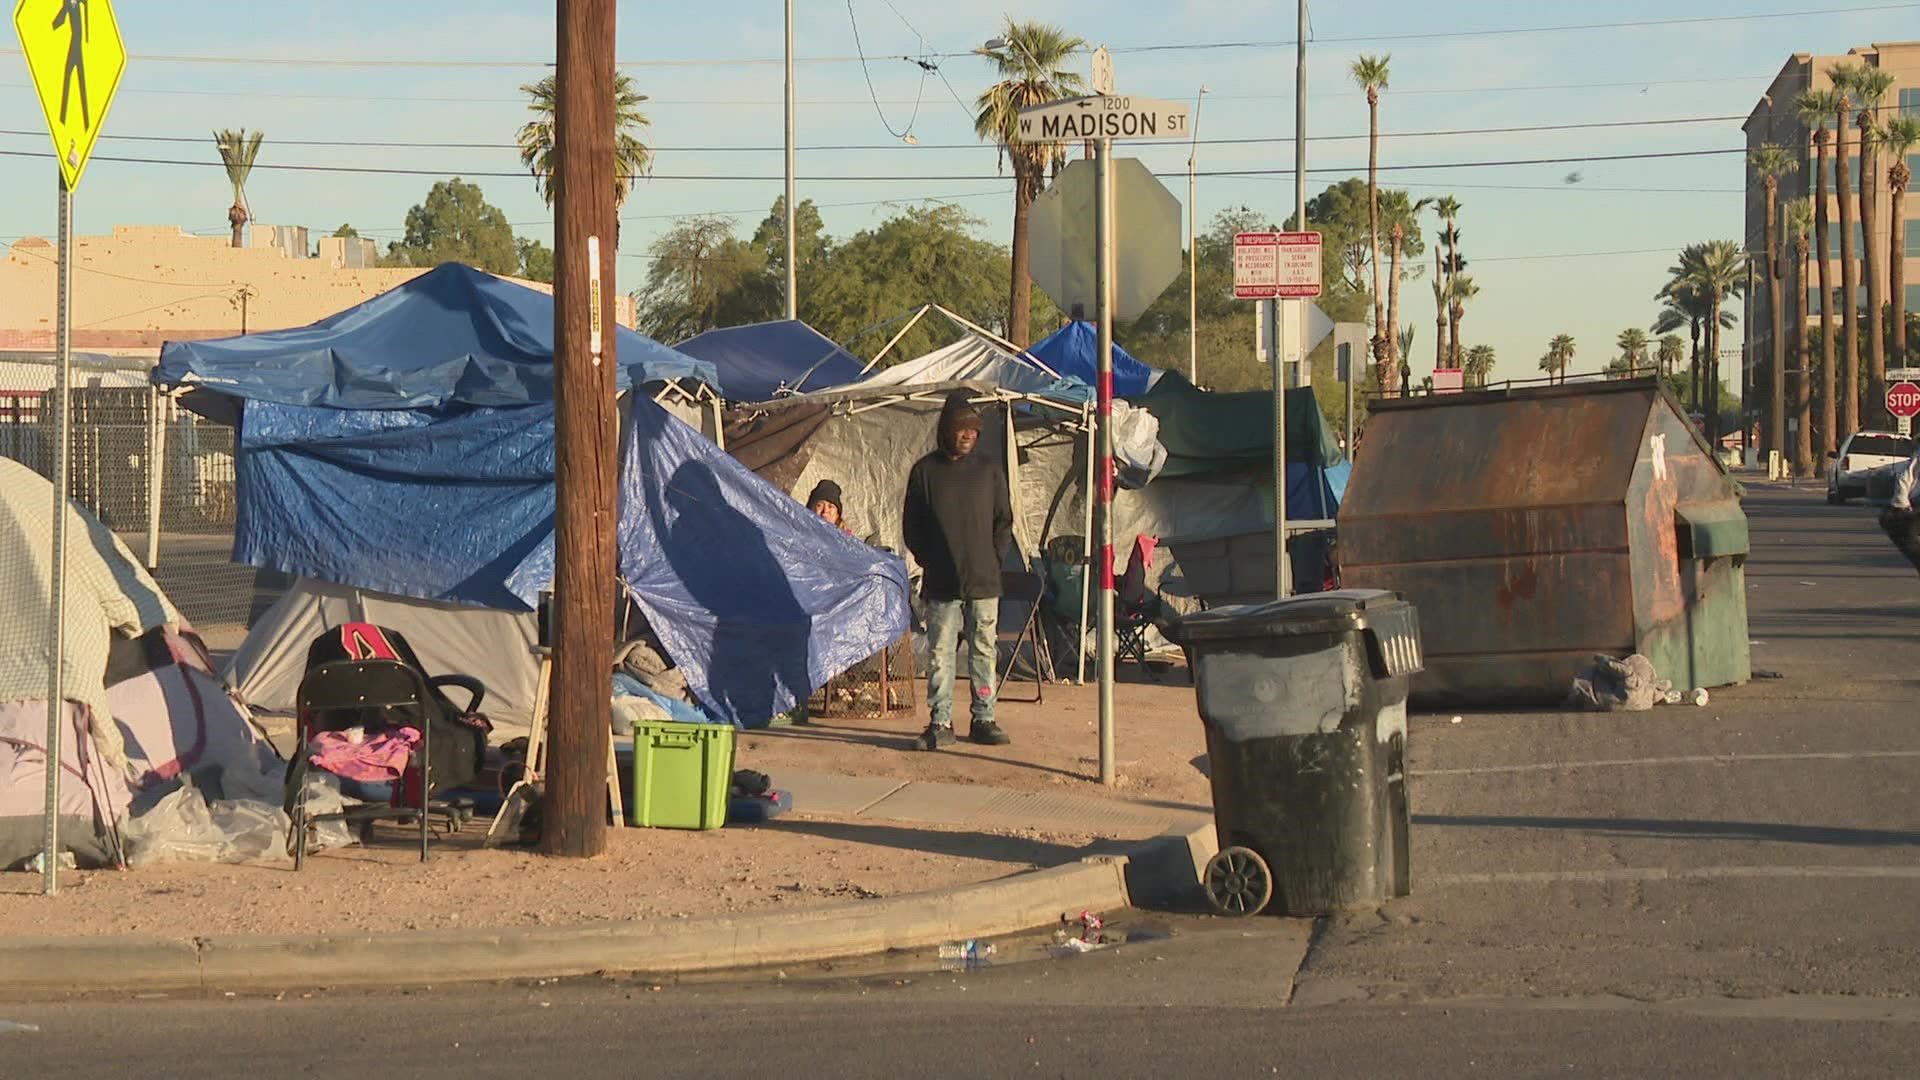 County data shows 130 unsheltered people died in 2021 from heat-related incidents. An I-Team analysis found calls for help in 'The Zone' soared in 2022.